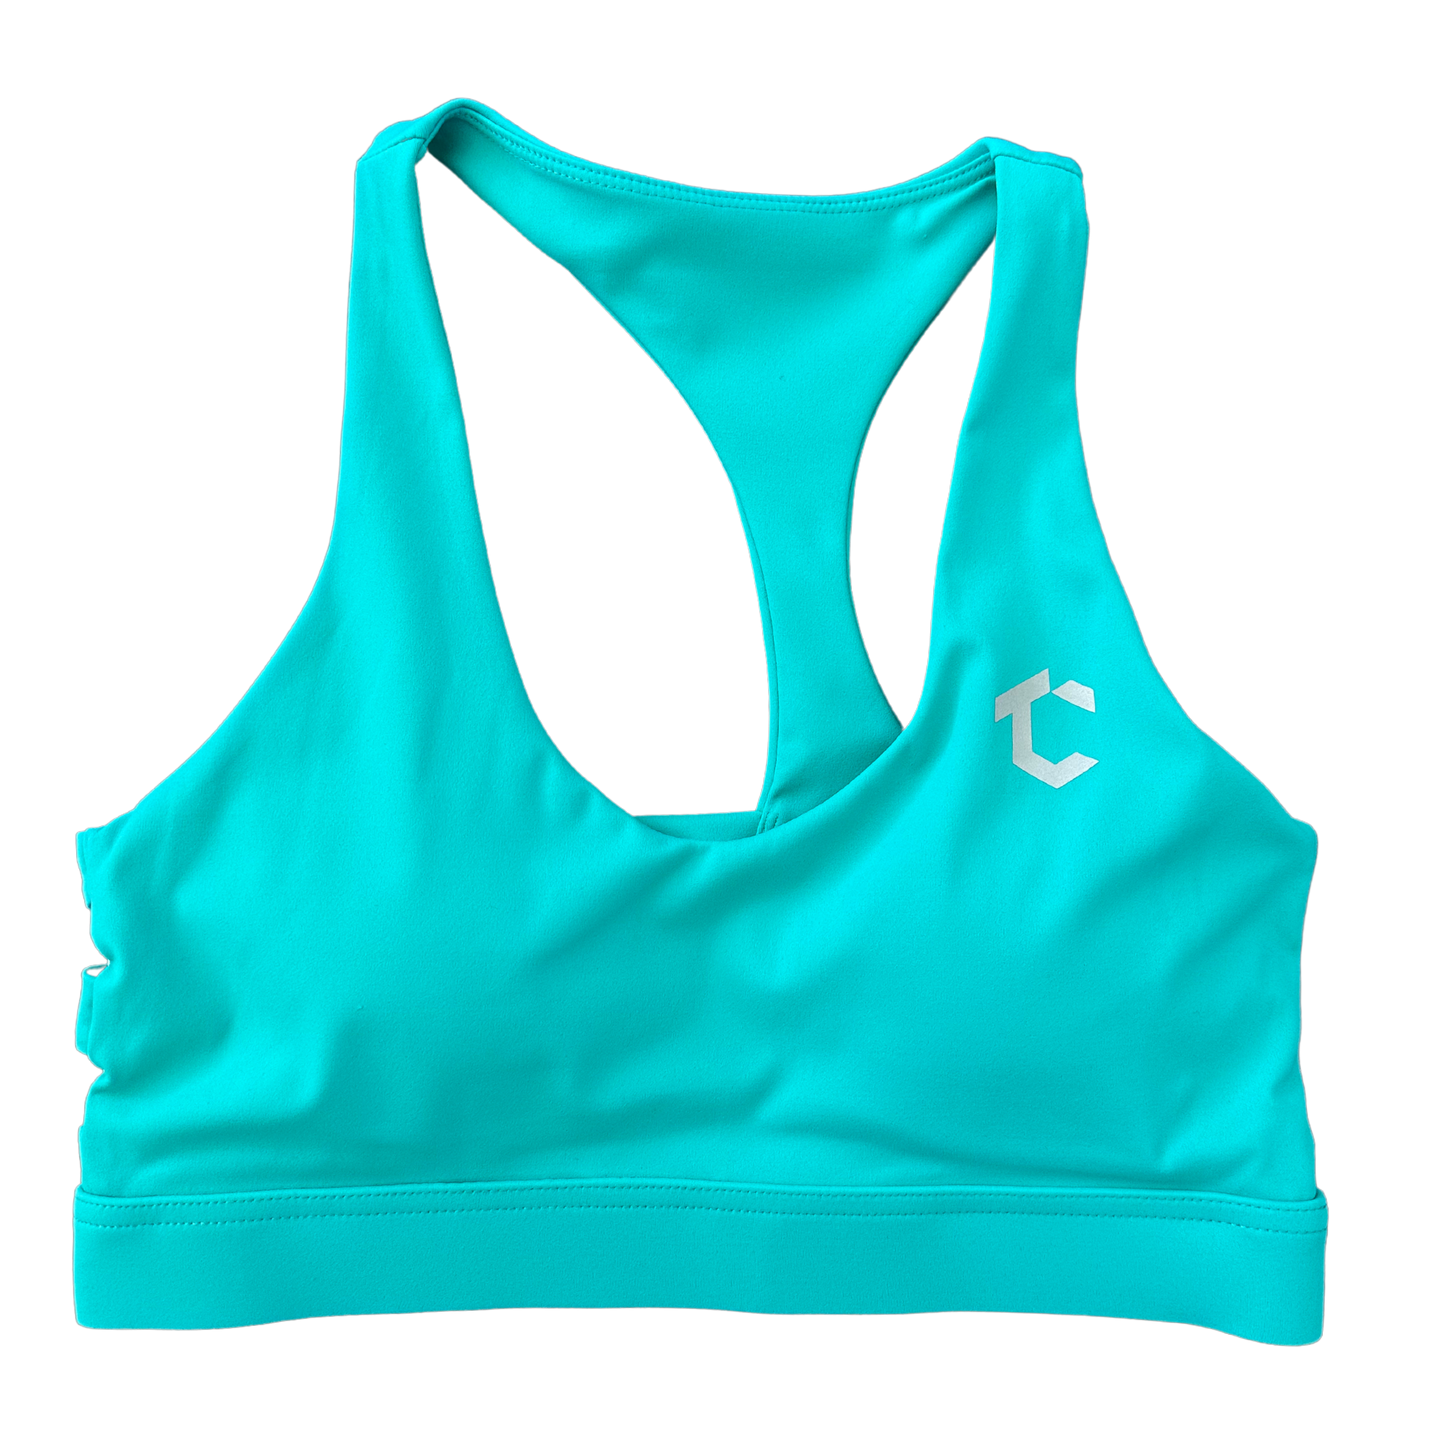 Double Strapped Back Sports Bra - Turquoise Green